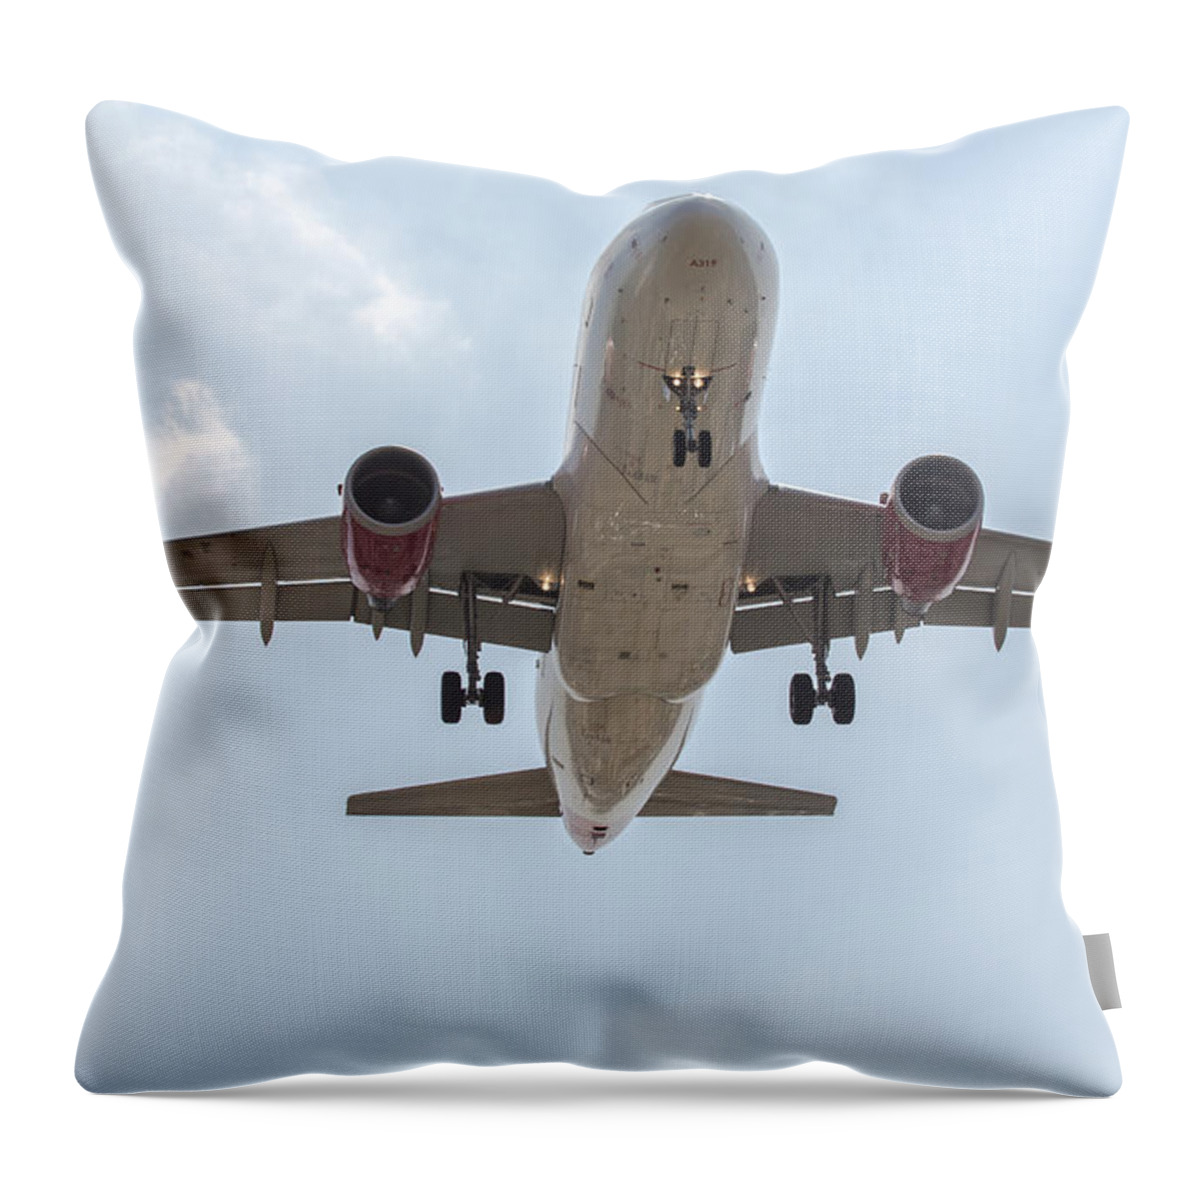 Virgin Throw Pillow featuring the photograph Virgin America Airbus 319 by John Daly